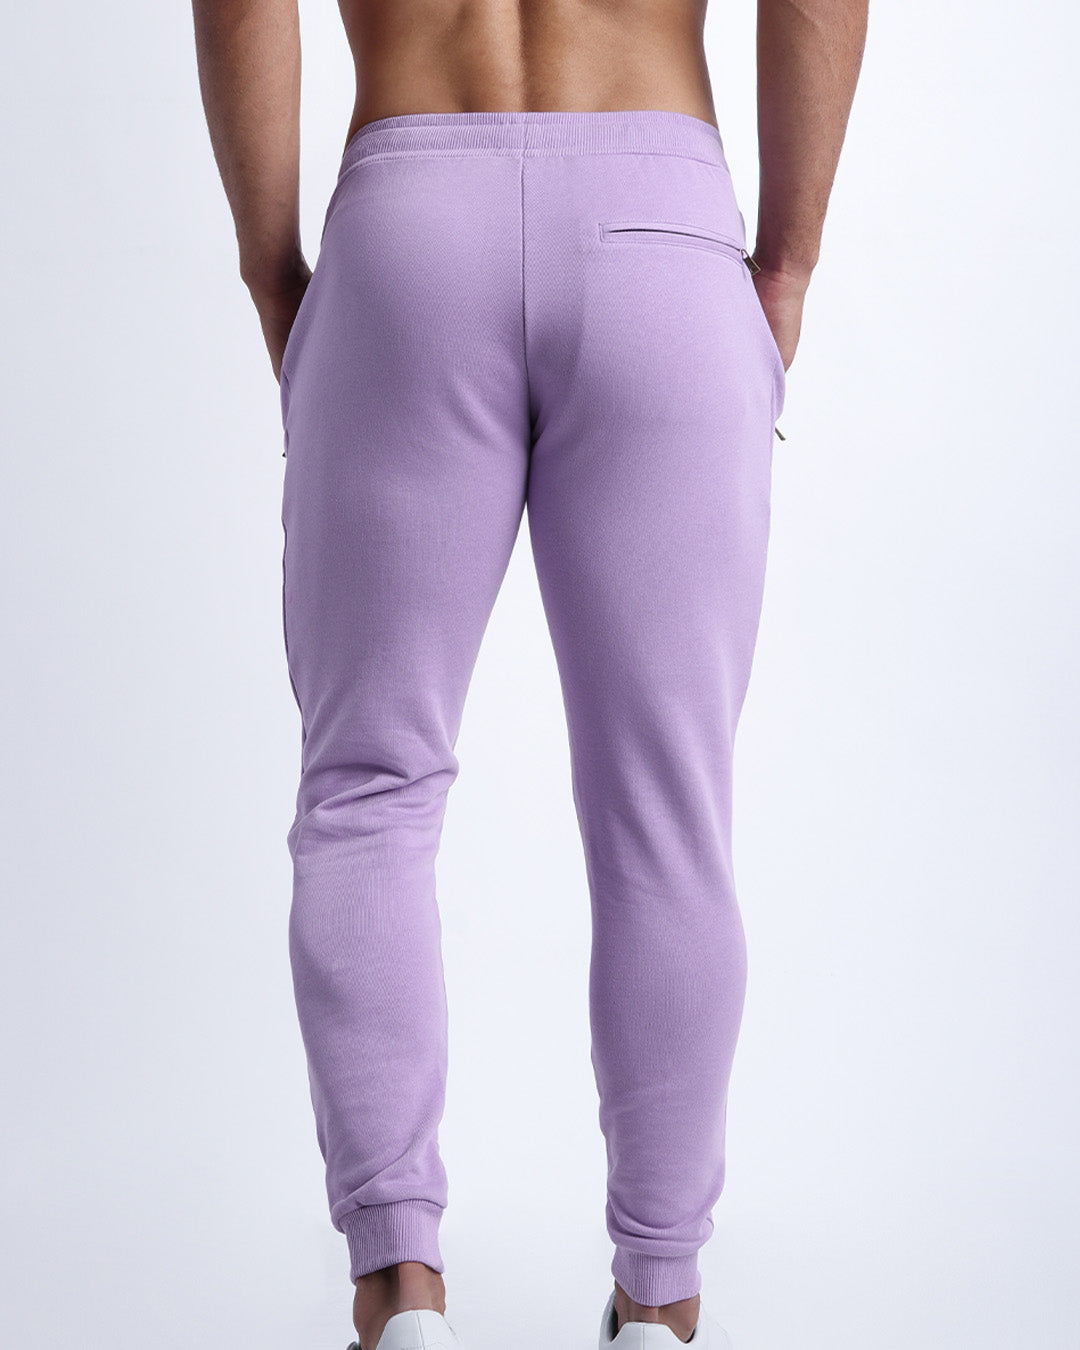 Pivl Striped Women Pink, Purple Track Pants - Buy Pivl Striped Women Pink, Purple  Track Pants Online at Best Prices in India | Flipkart.com